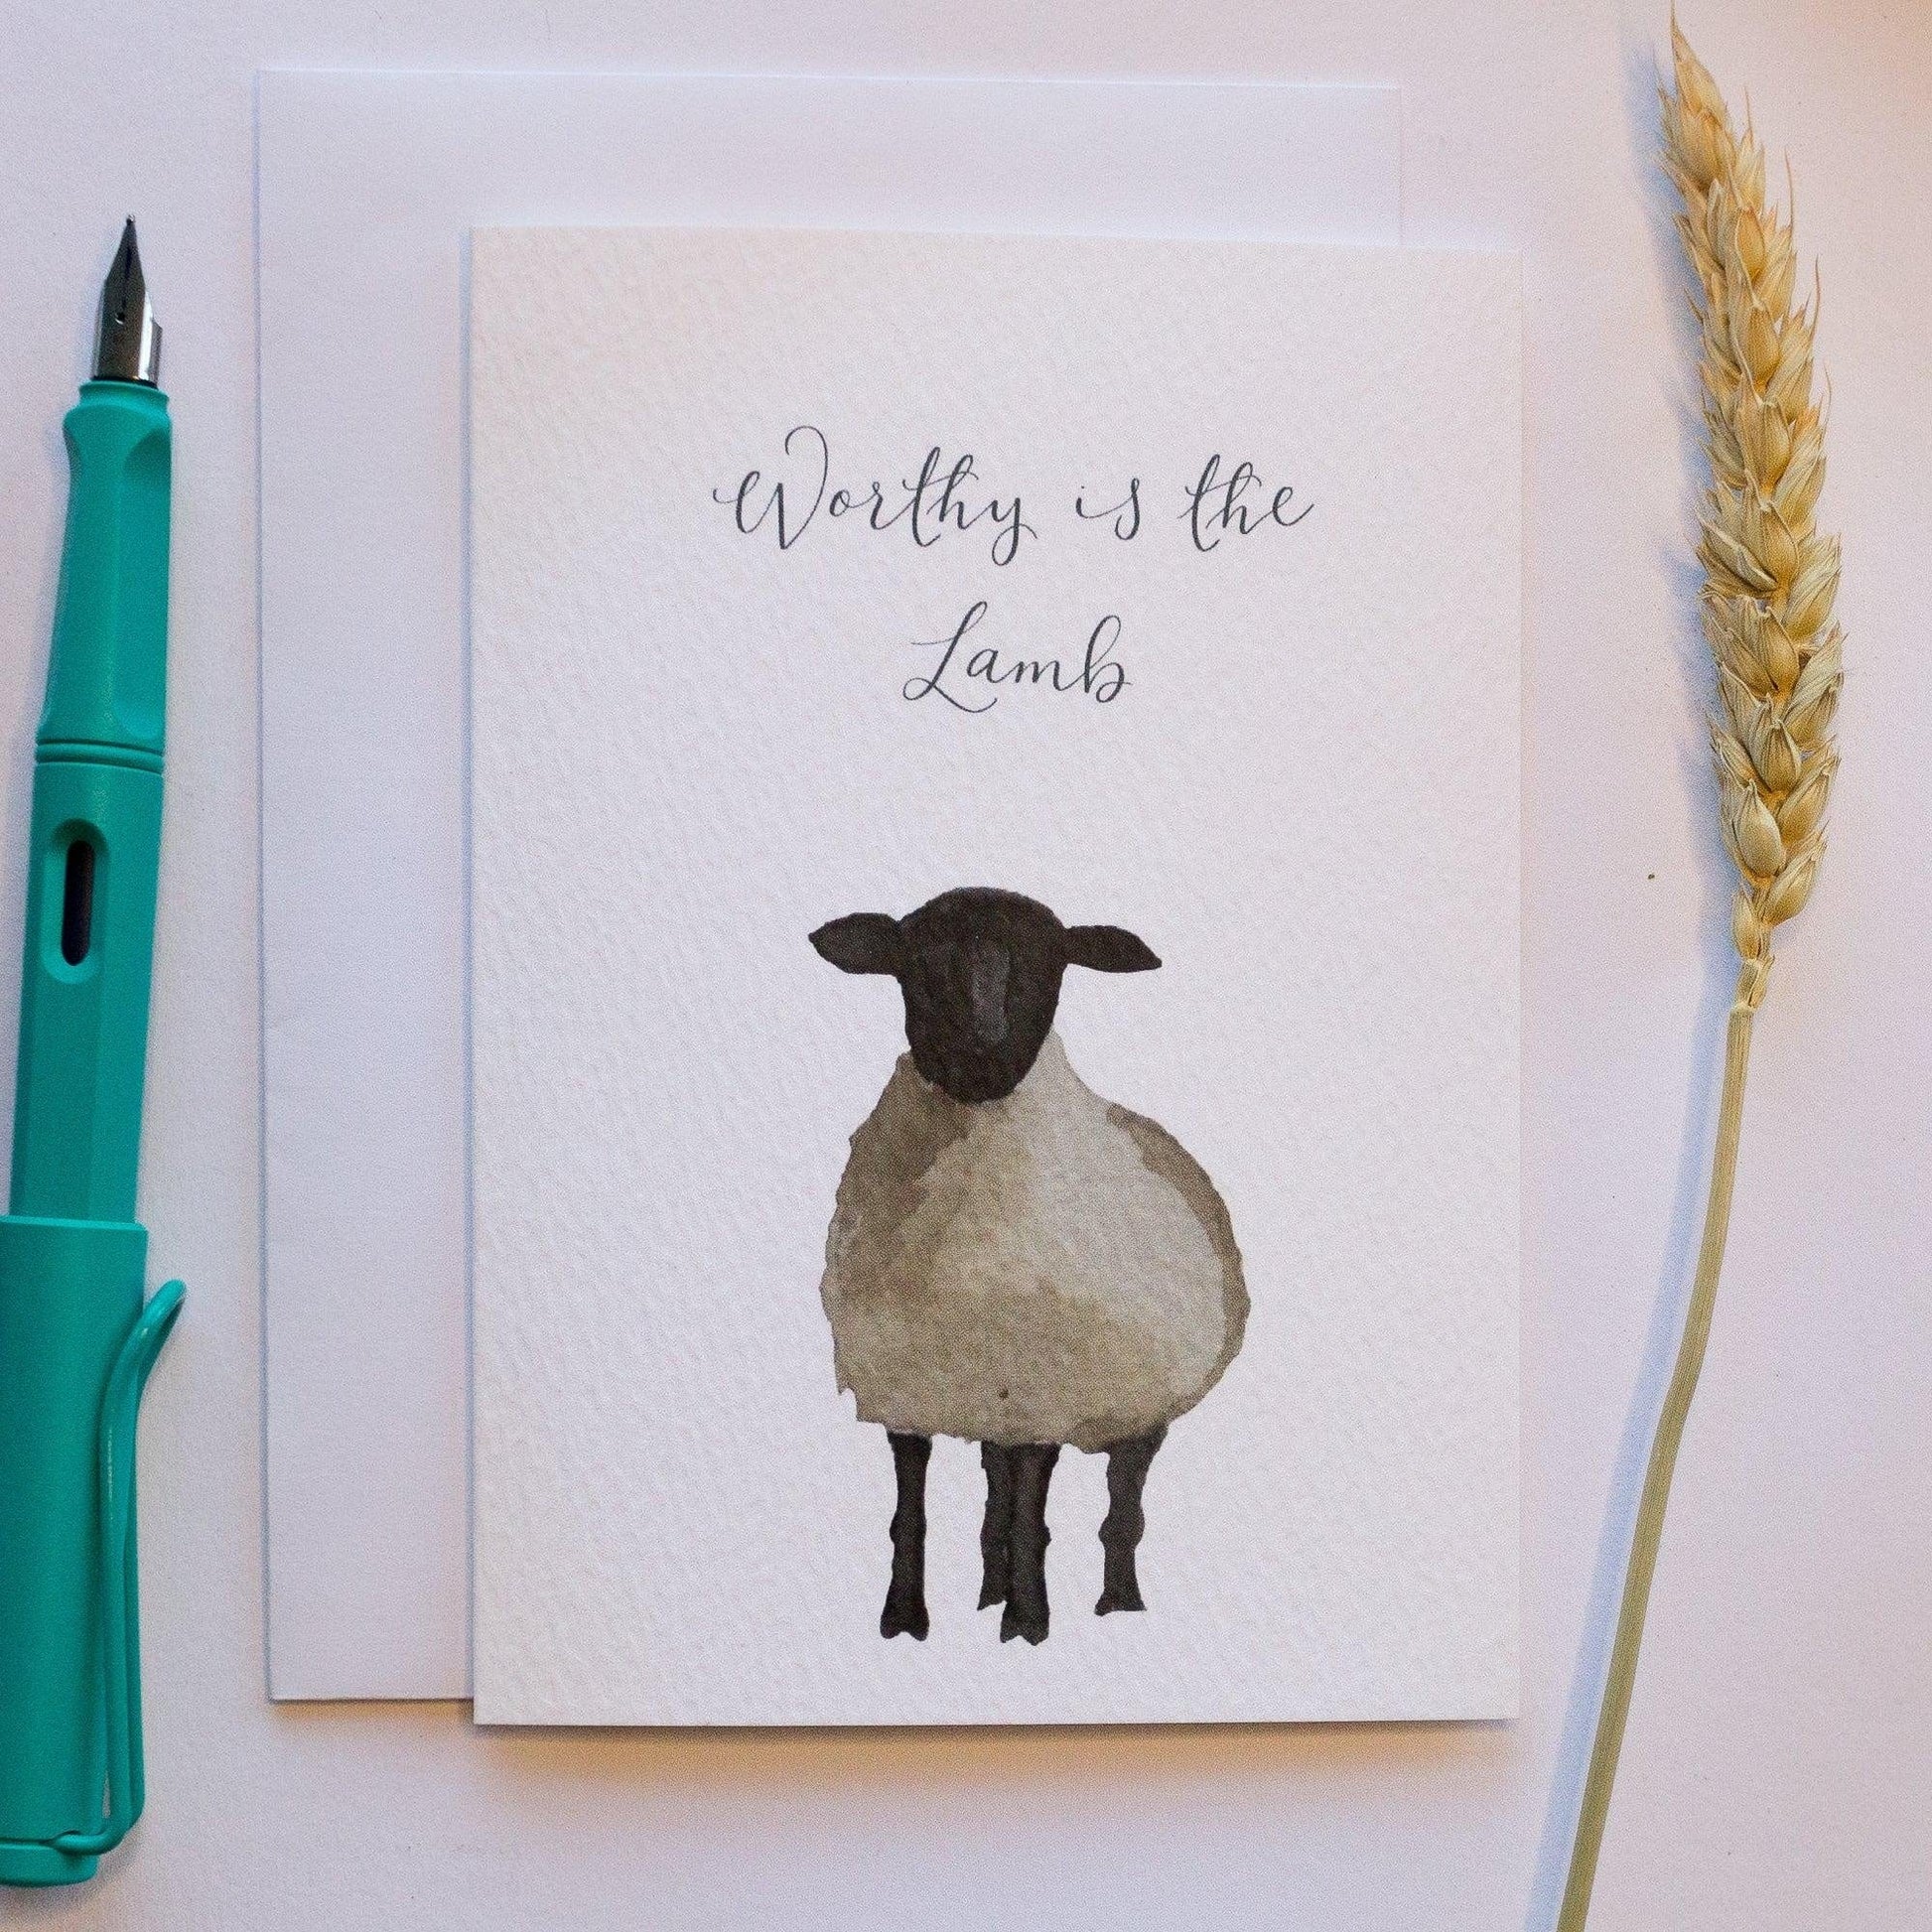 And Hope Designs Greeting & Note Cards Easter Worthy is the Lamb card